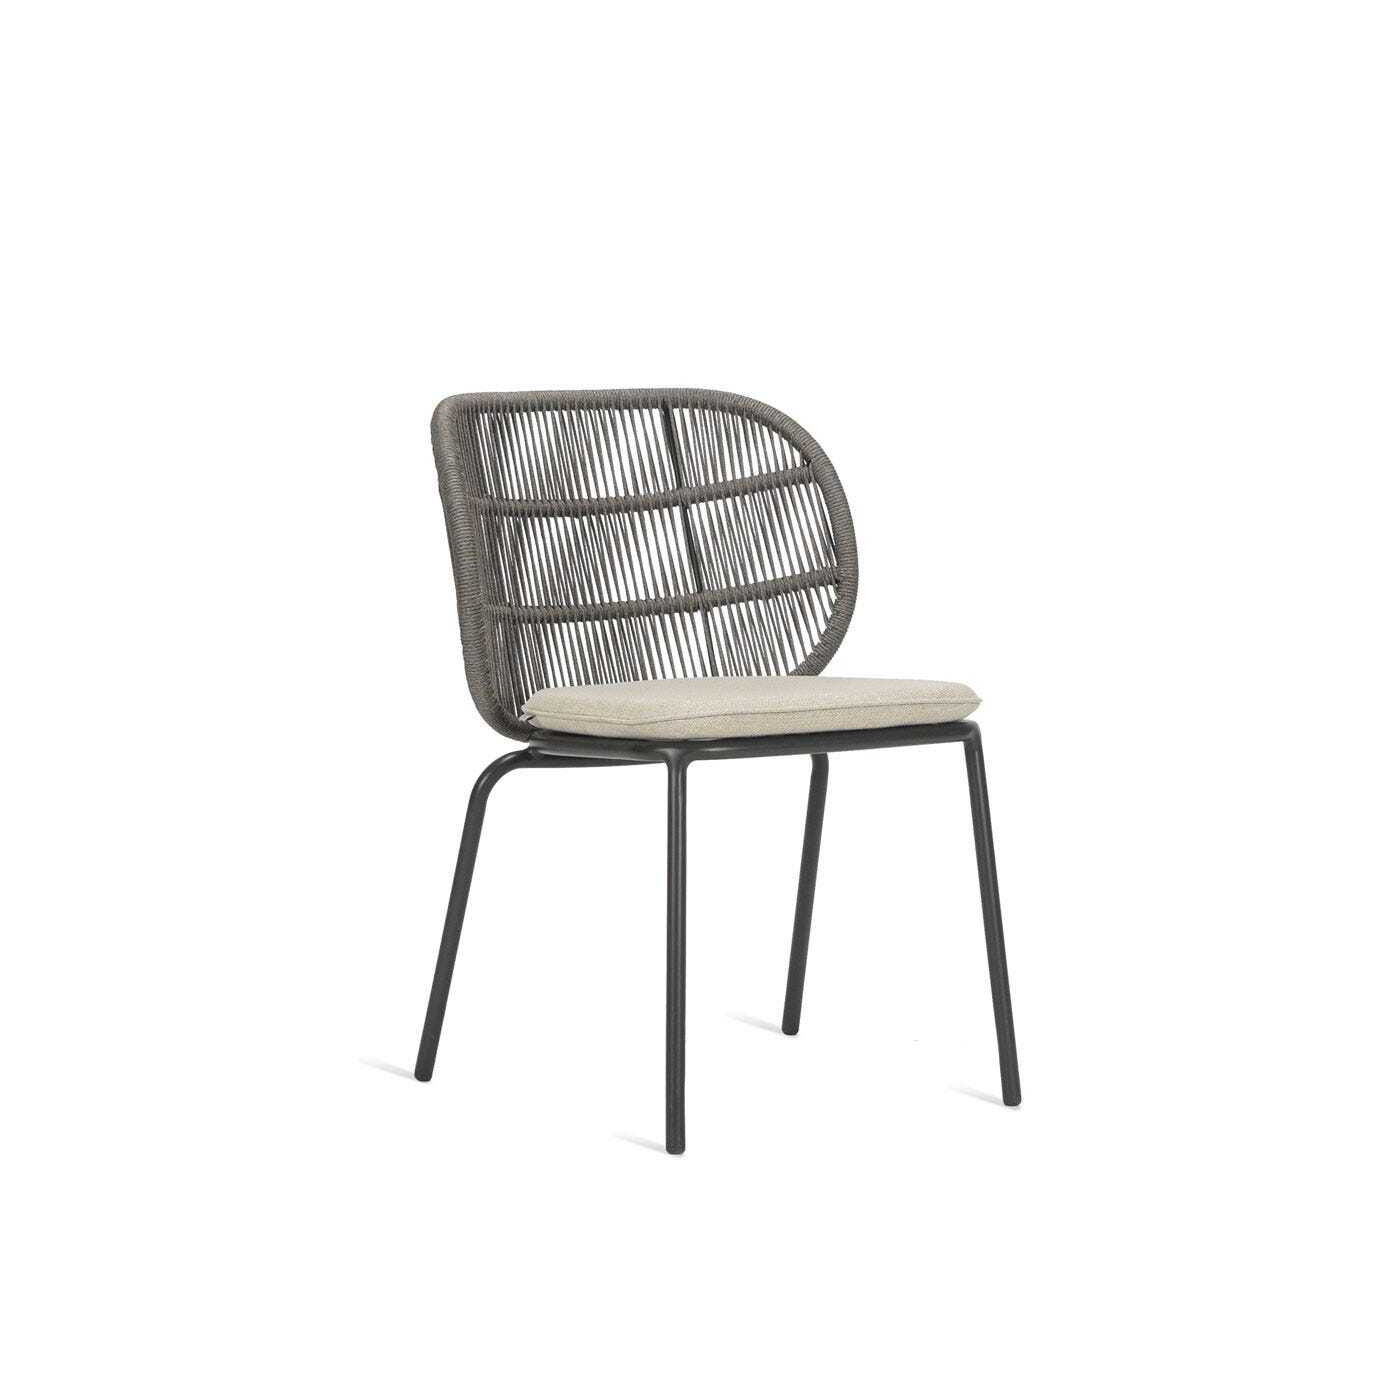 Vincent Sheppard Kodo Outdoor Dining Chair Almond - image 1